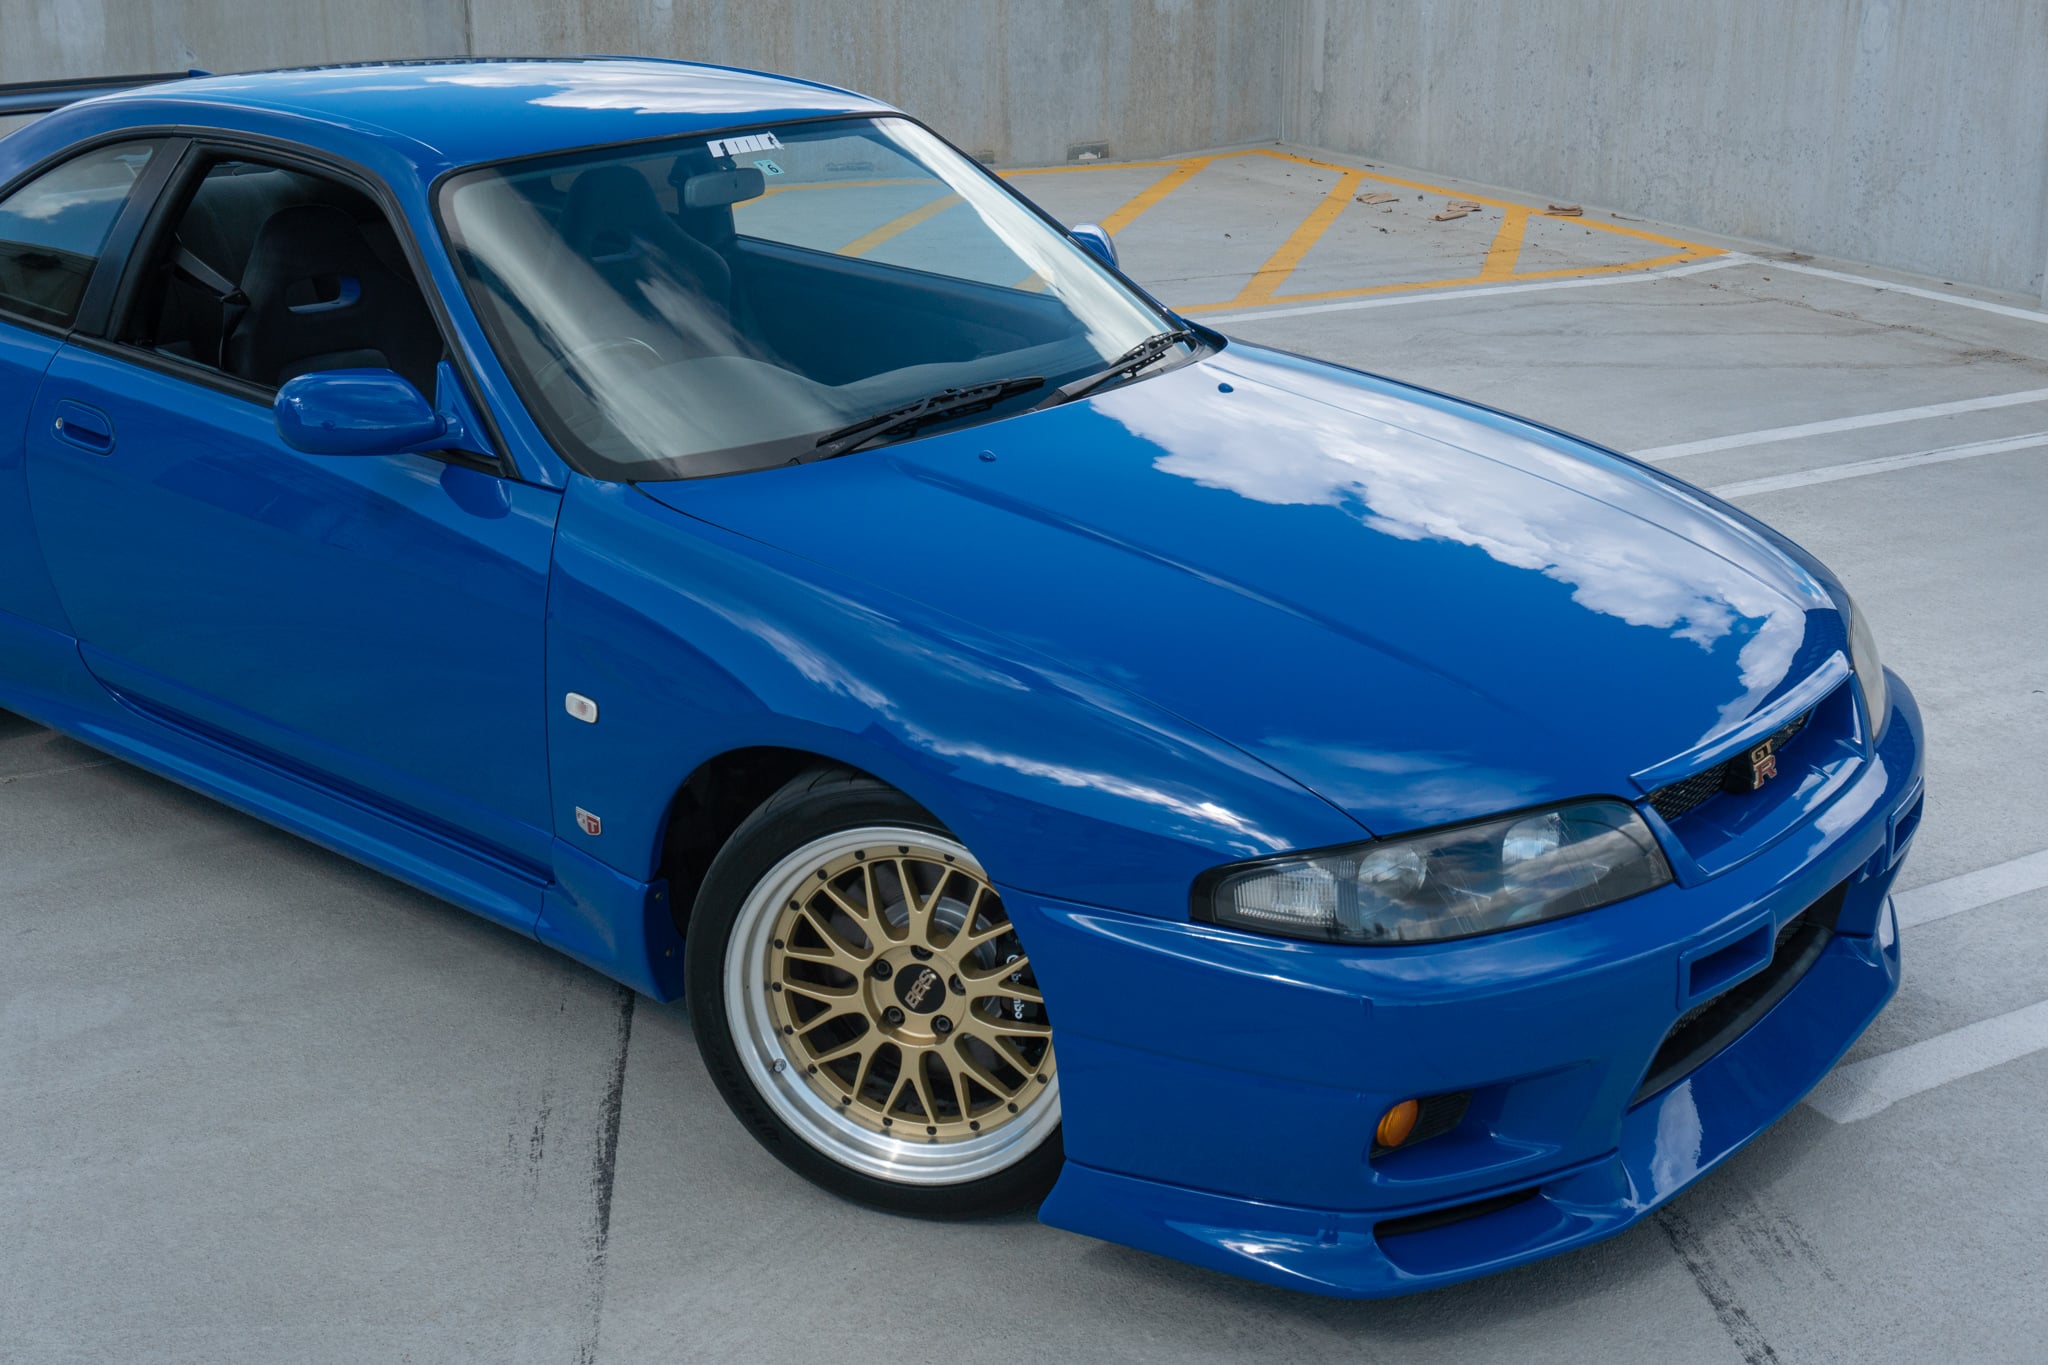 1996 Nissan GT-R R33 LM Limited | 1 of 188 LM Limited | Rare BT2 Championship Blue | Lightly Tuned | HKS | BBS